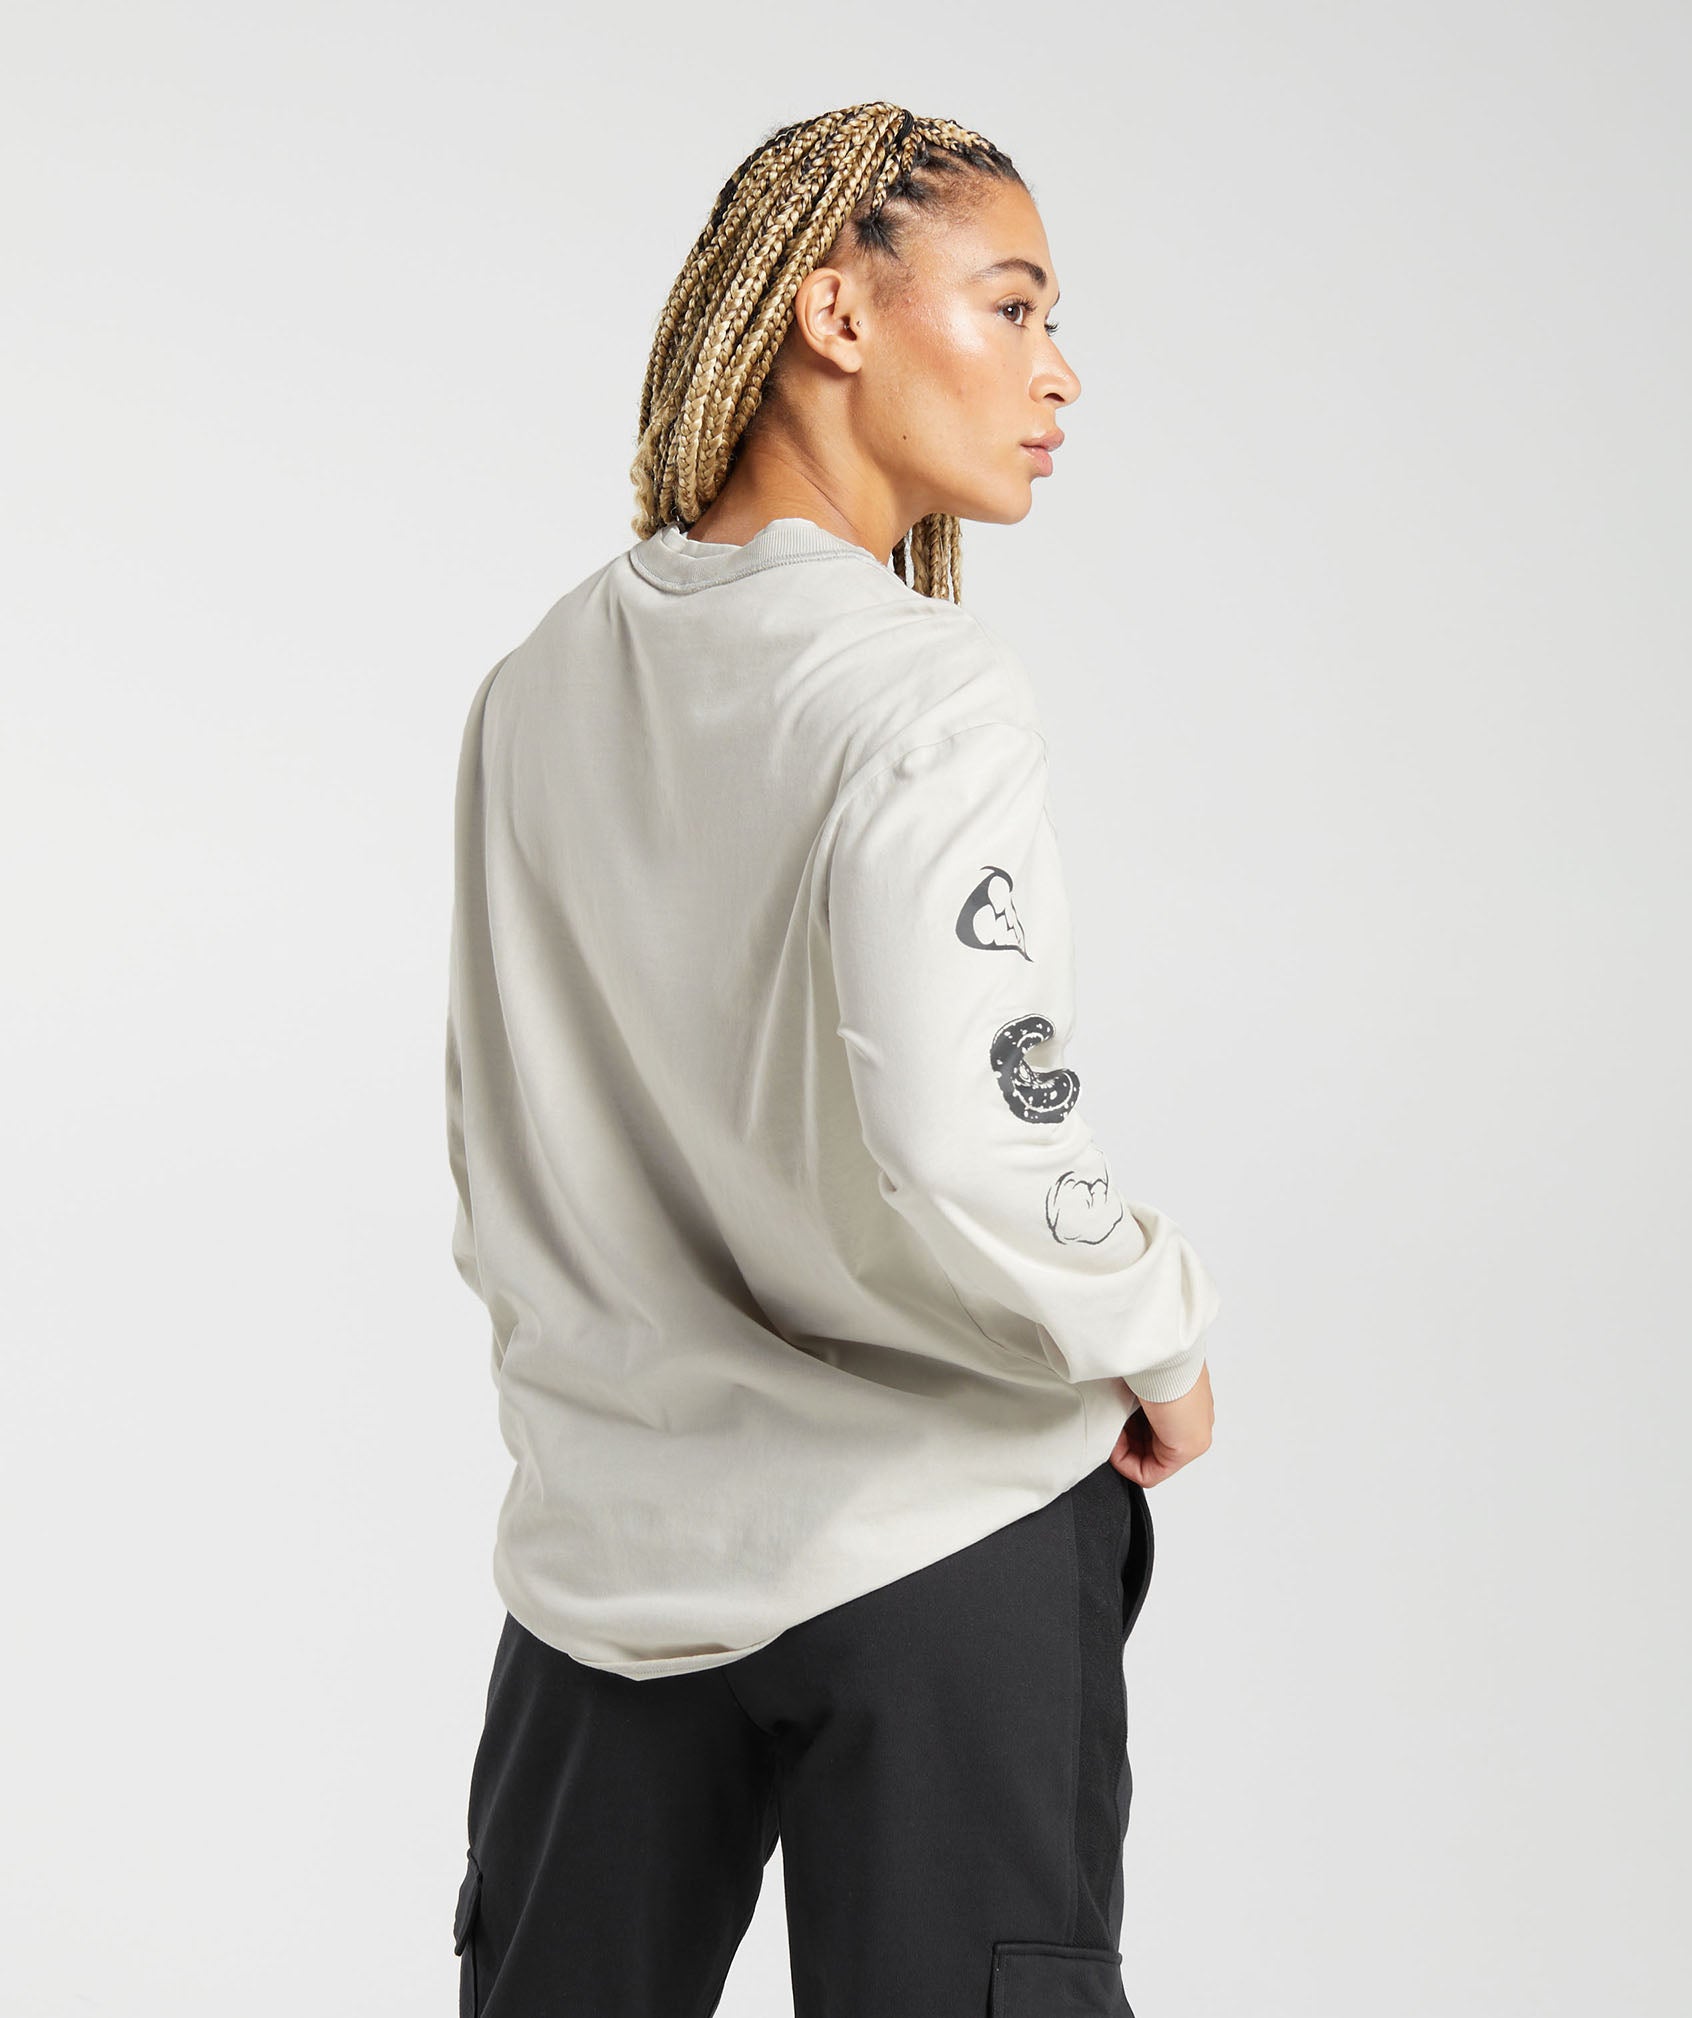 Legacy Washed Long Sleeve Top in Metal Grey/Acid Wash - view 2